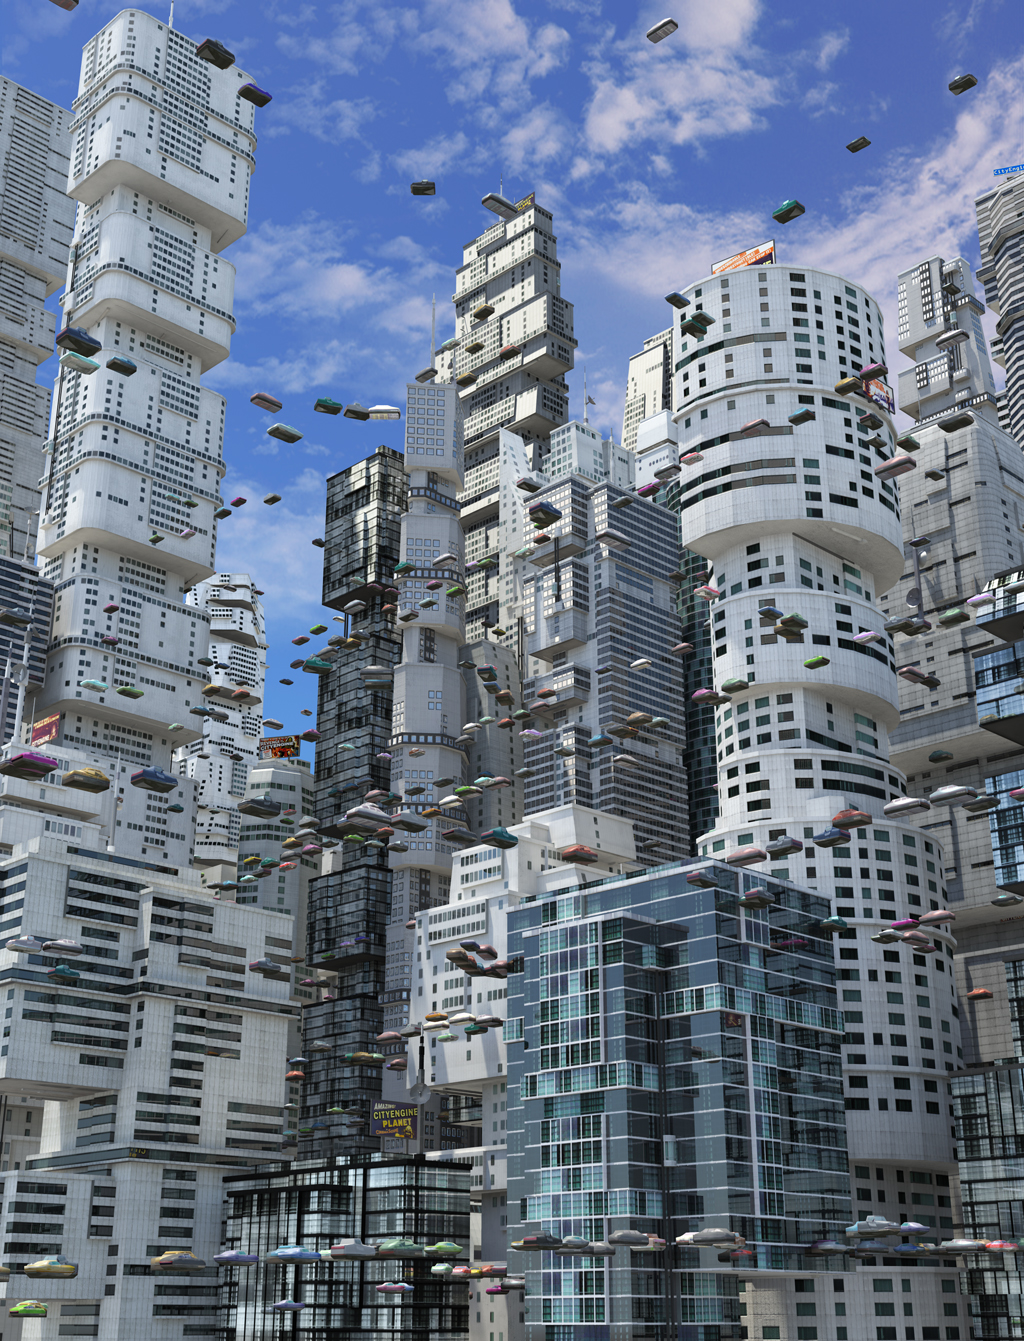 Create realistic—and futuristic—cityscapes with CityEngine 2013.